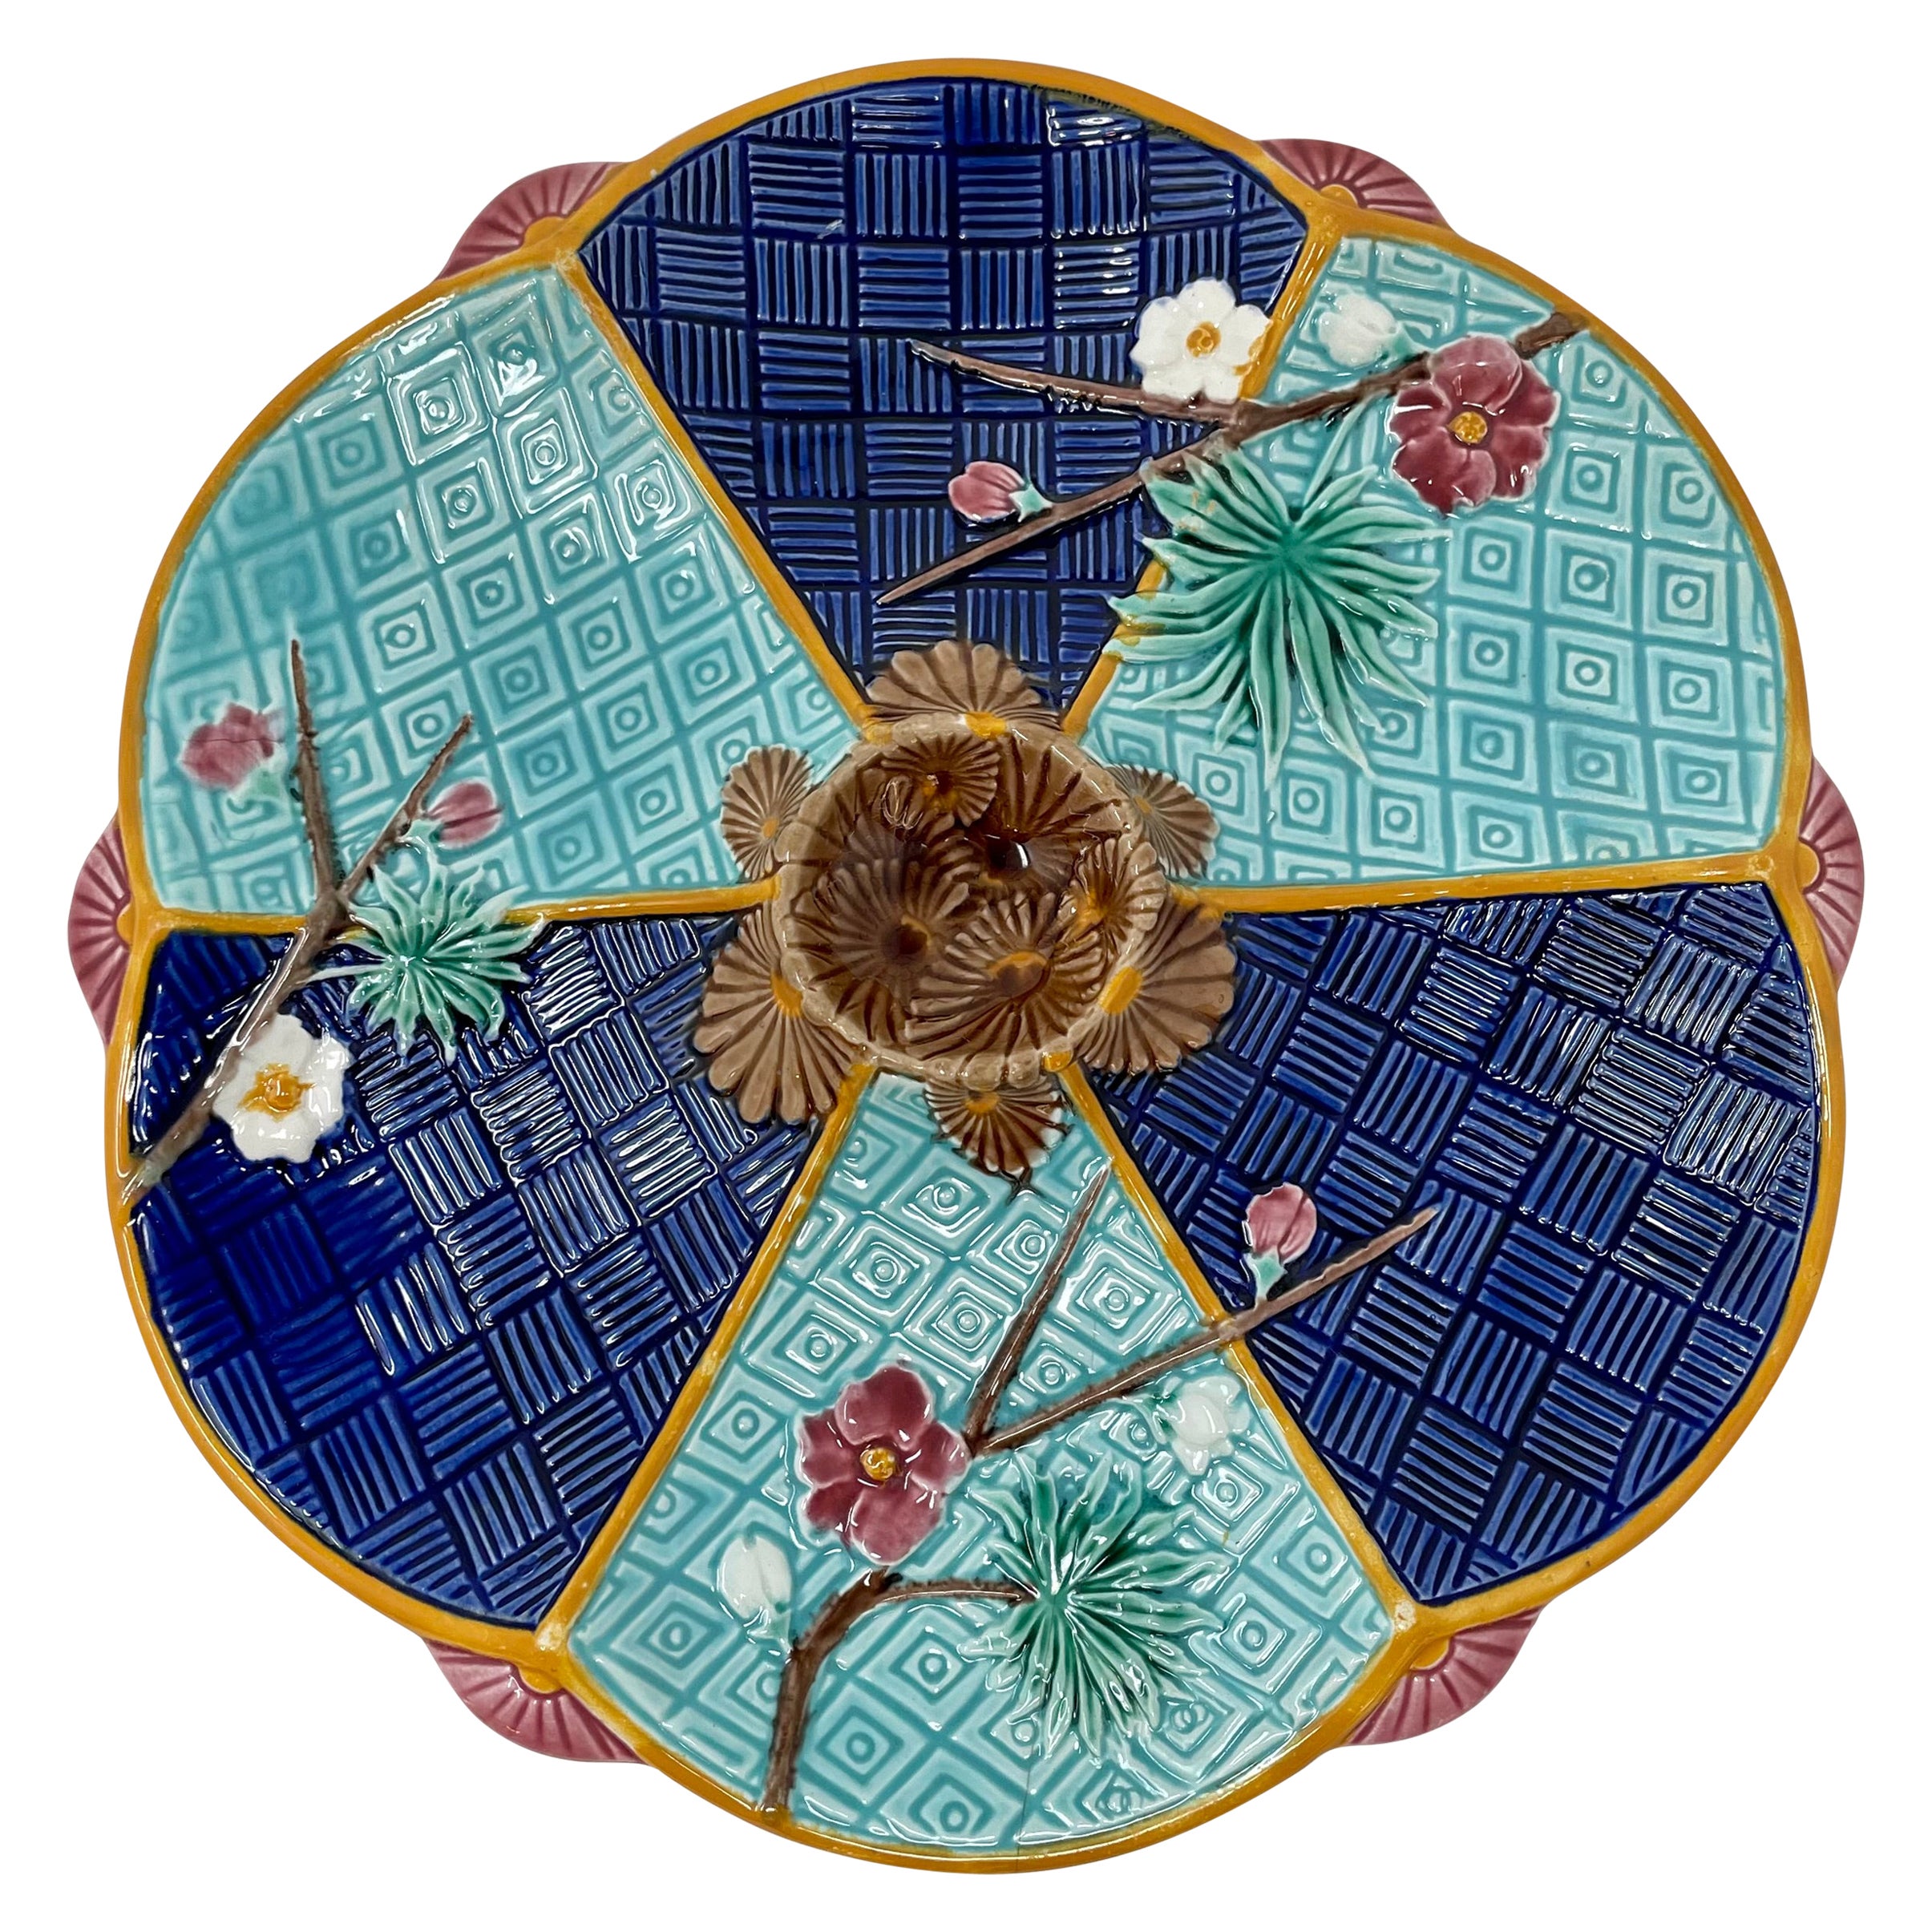 Antique 19th Century English Majolica Porcelain Cobalt & Turquoise Oyster Plate For Sale